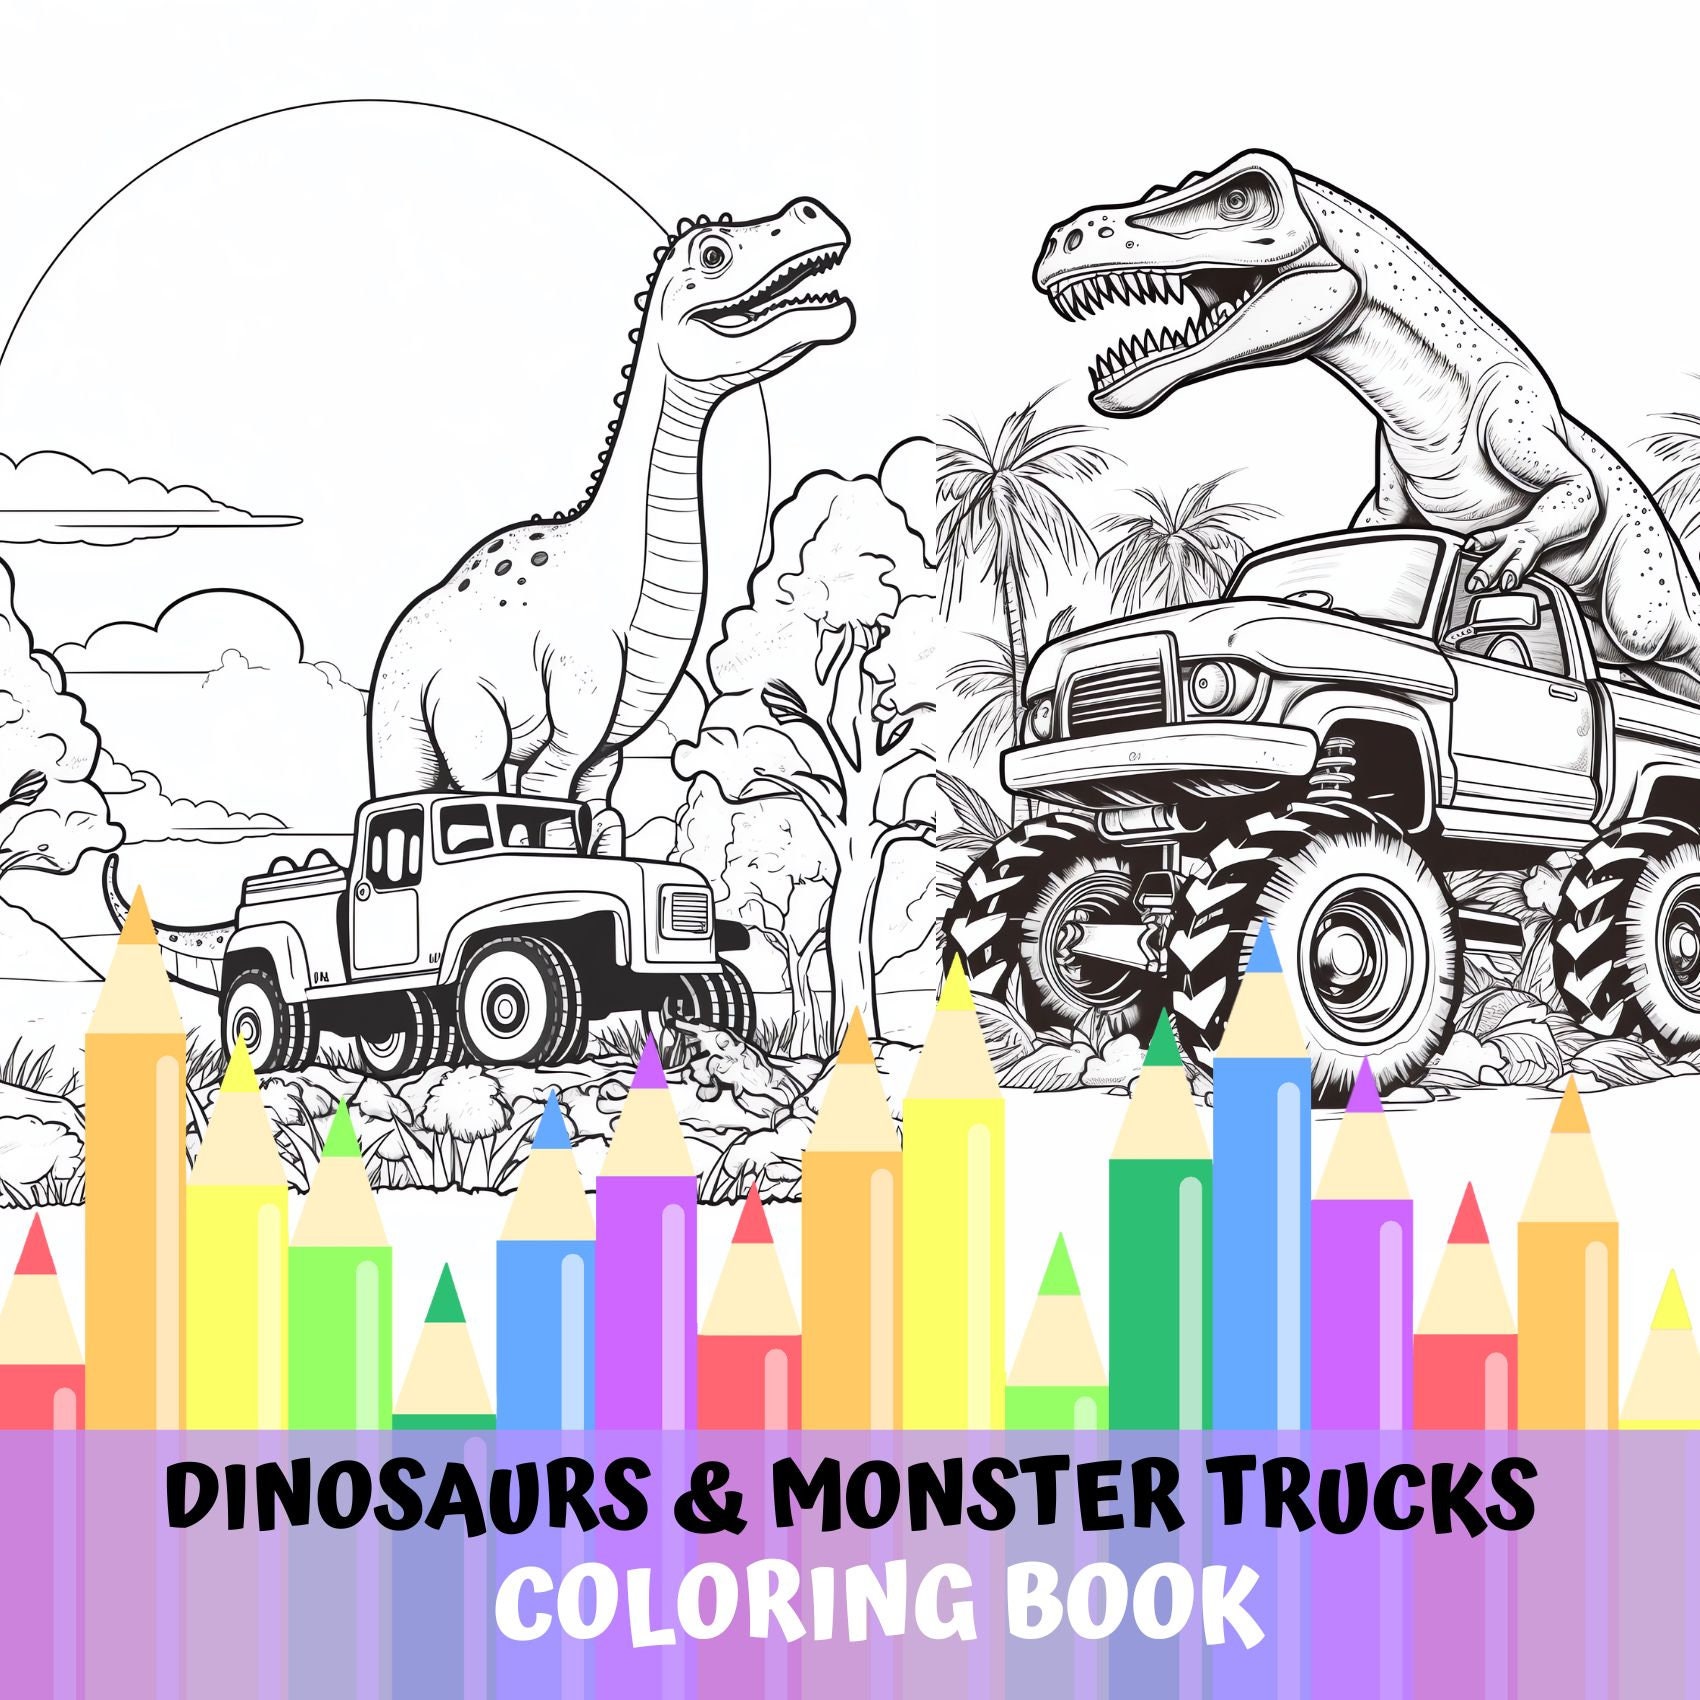 Monster truck coloring pages t rex dinosaurs monster truck coloring book gift birthday roadtrip activities book for kids coloring pages download now